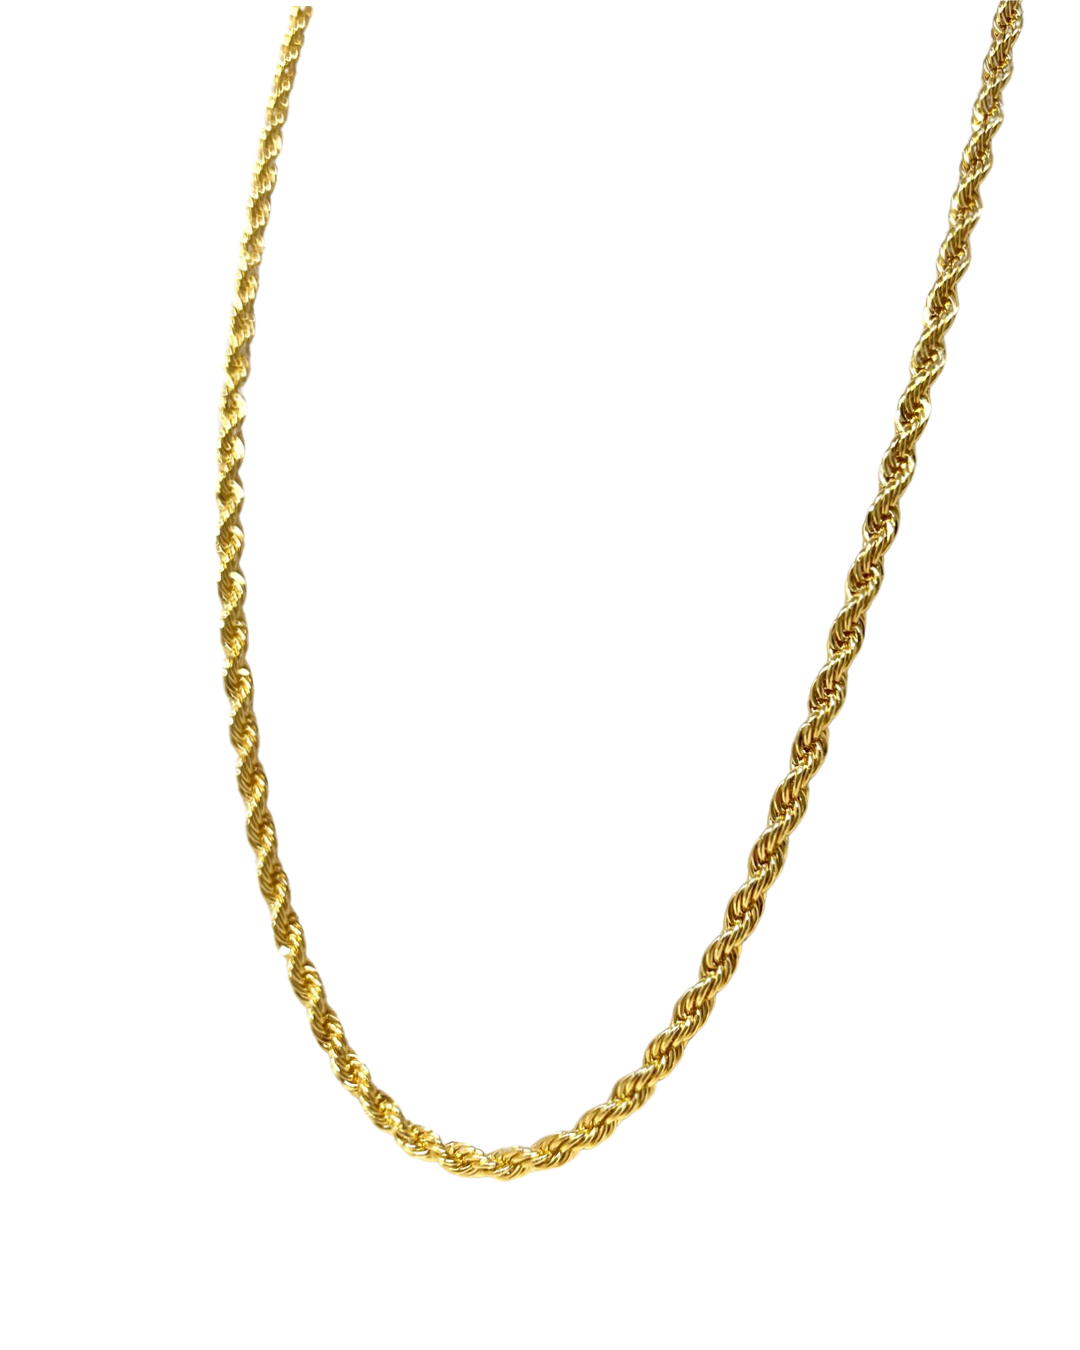 Daniel 24” Chunky Rope Chain Necklace in Gold